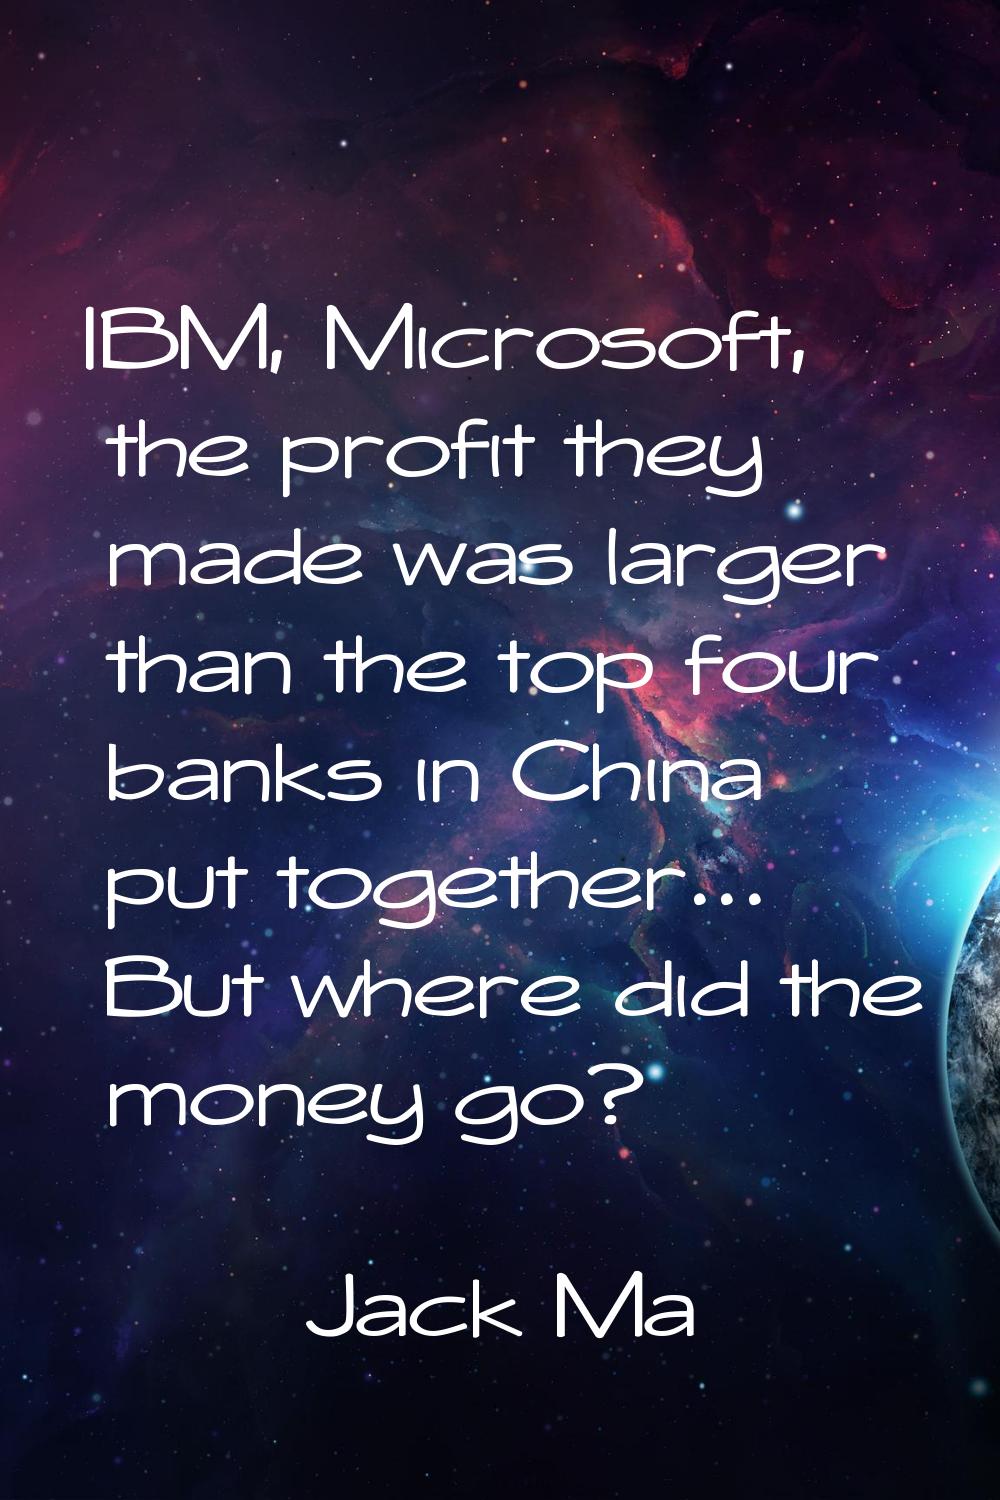 IBM, Microsoft, the profit they made was larger than the top four banks in China put together... Bu